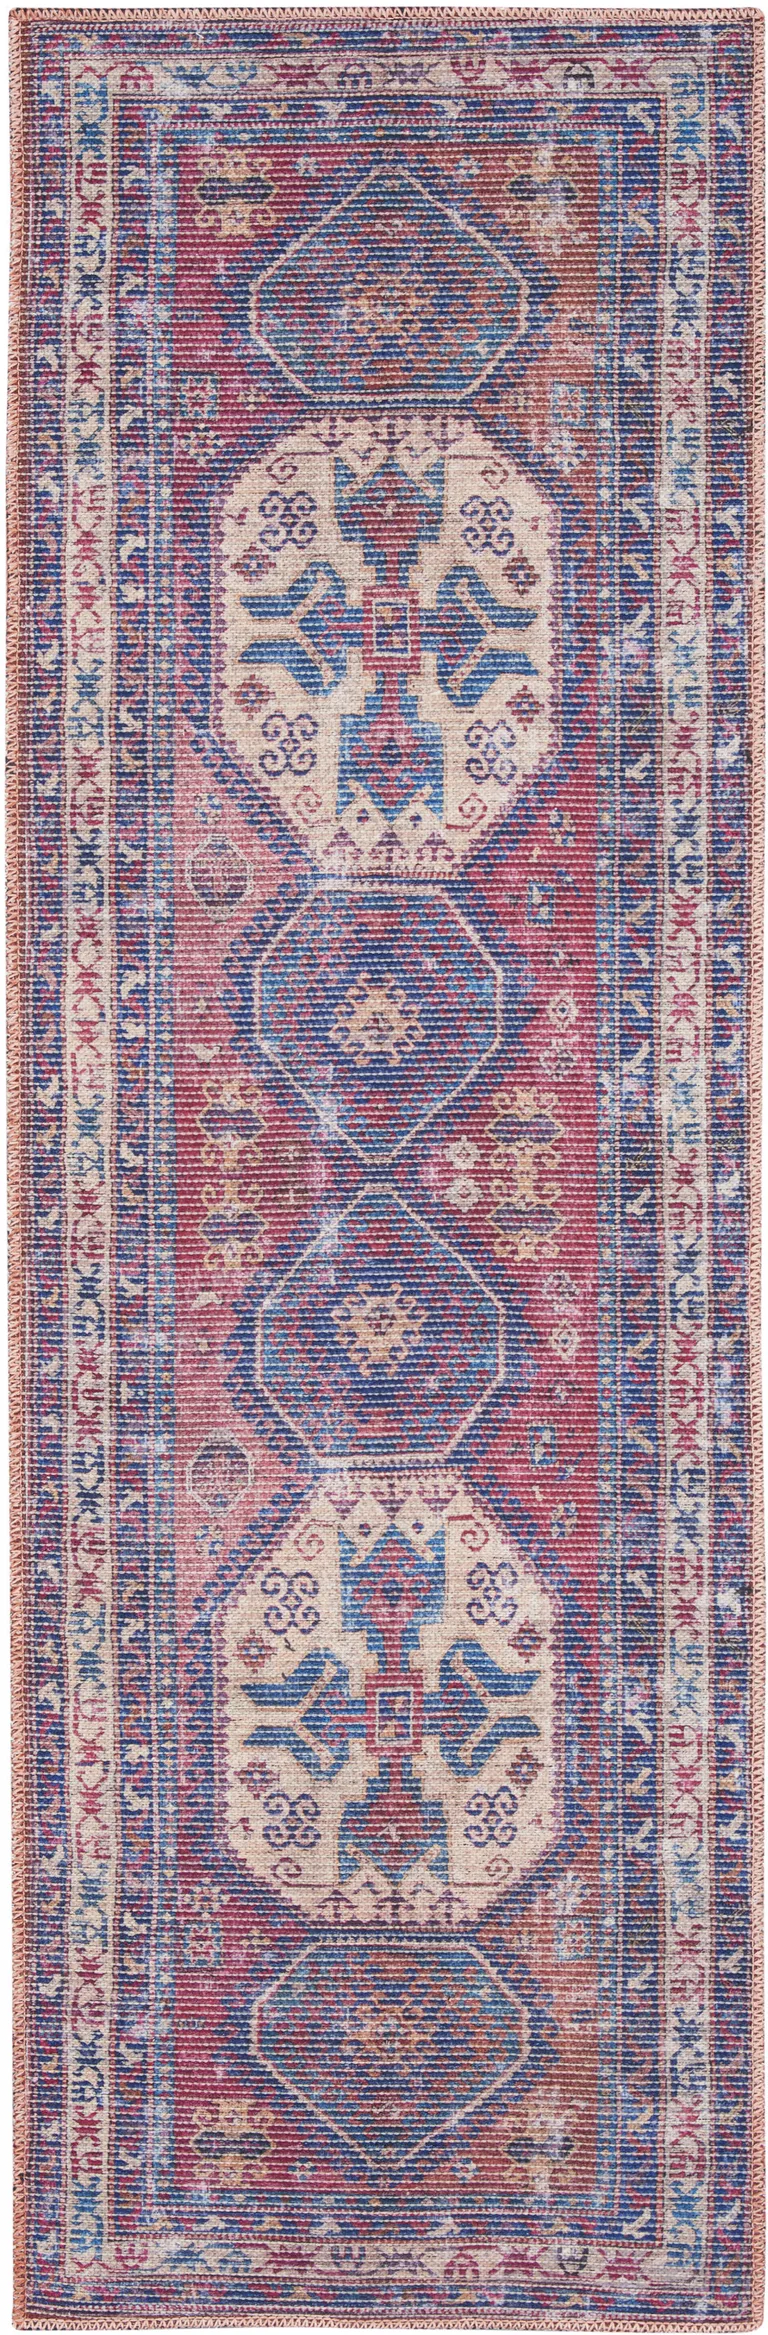 10' Floral Power Loom Distressed Washable Runner Rug Photo 1